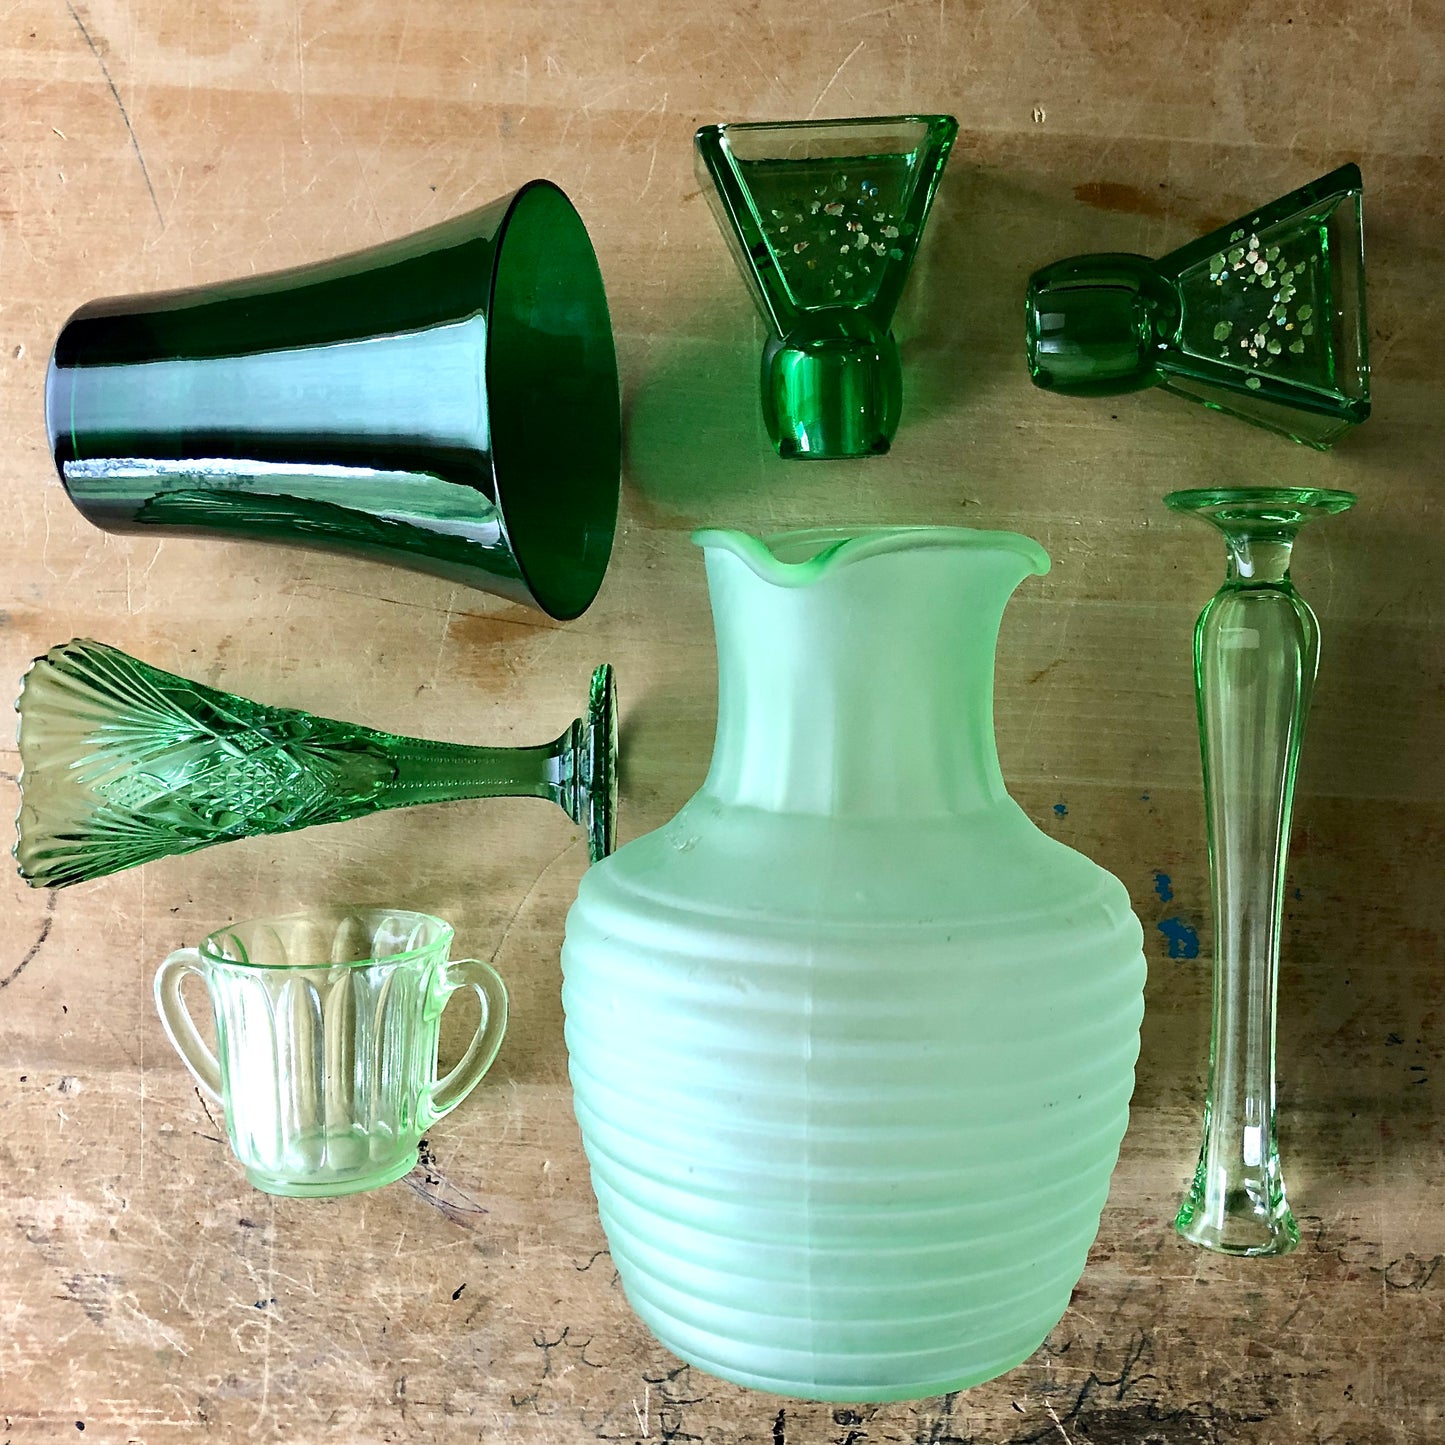 Green Depression Glass Collection with Uranium Glass (c.1930s)